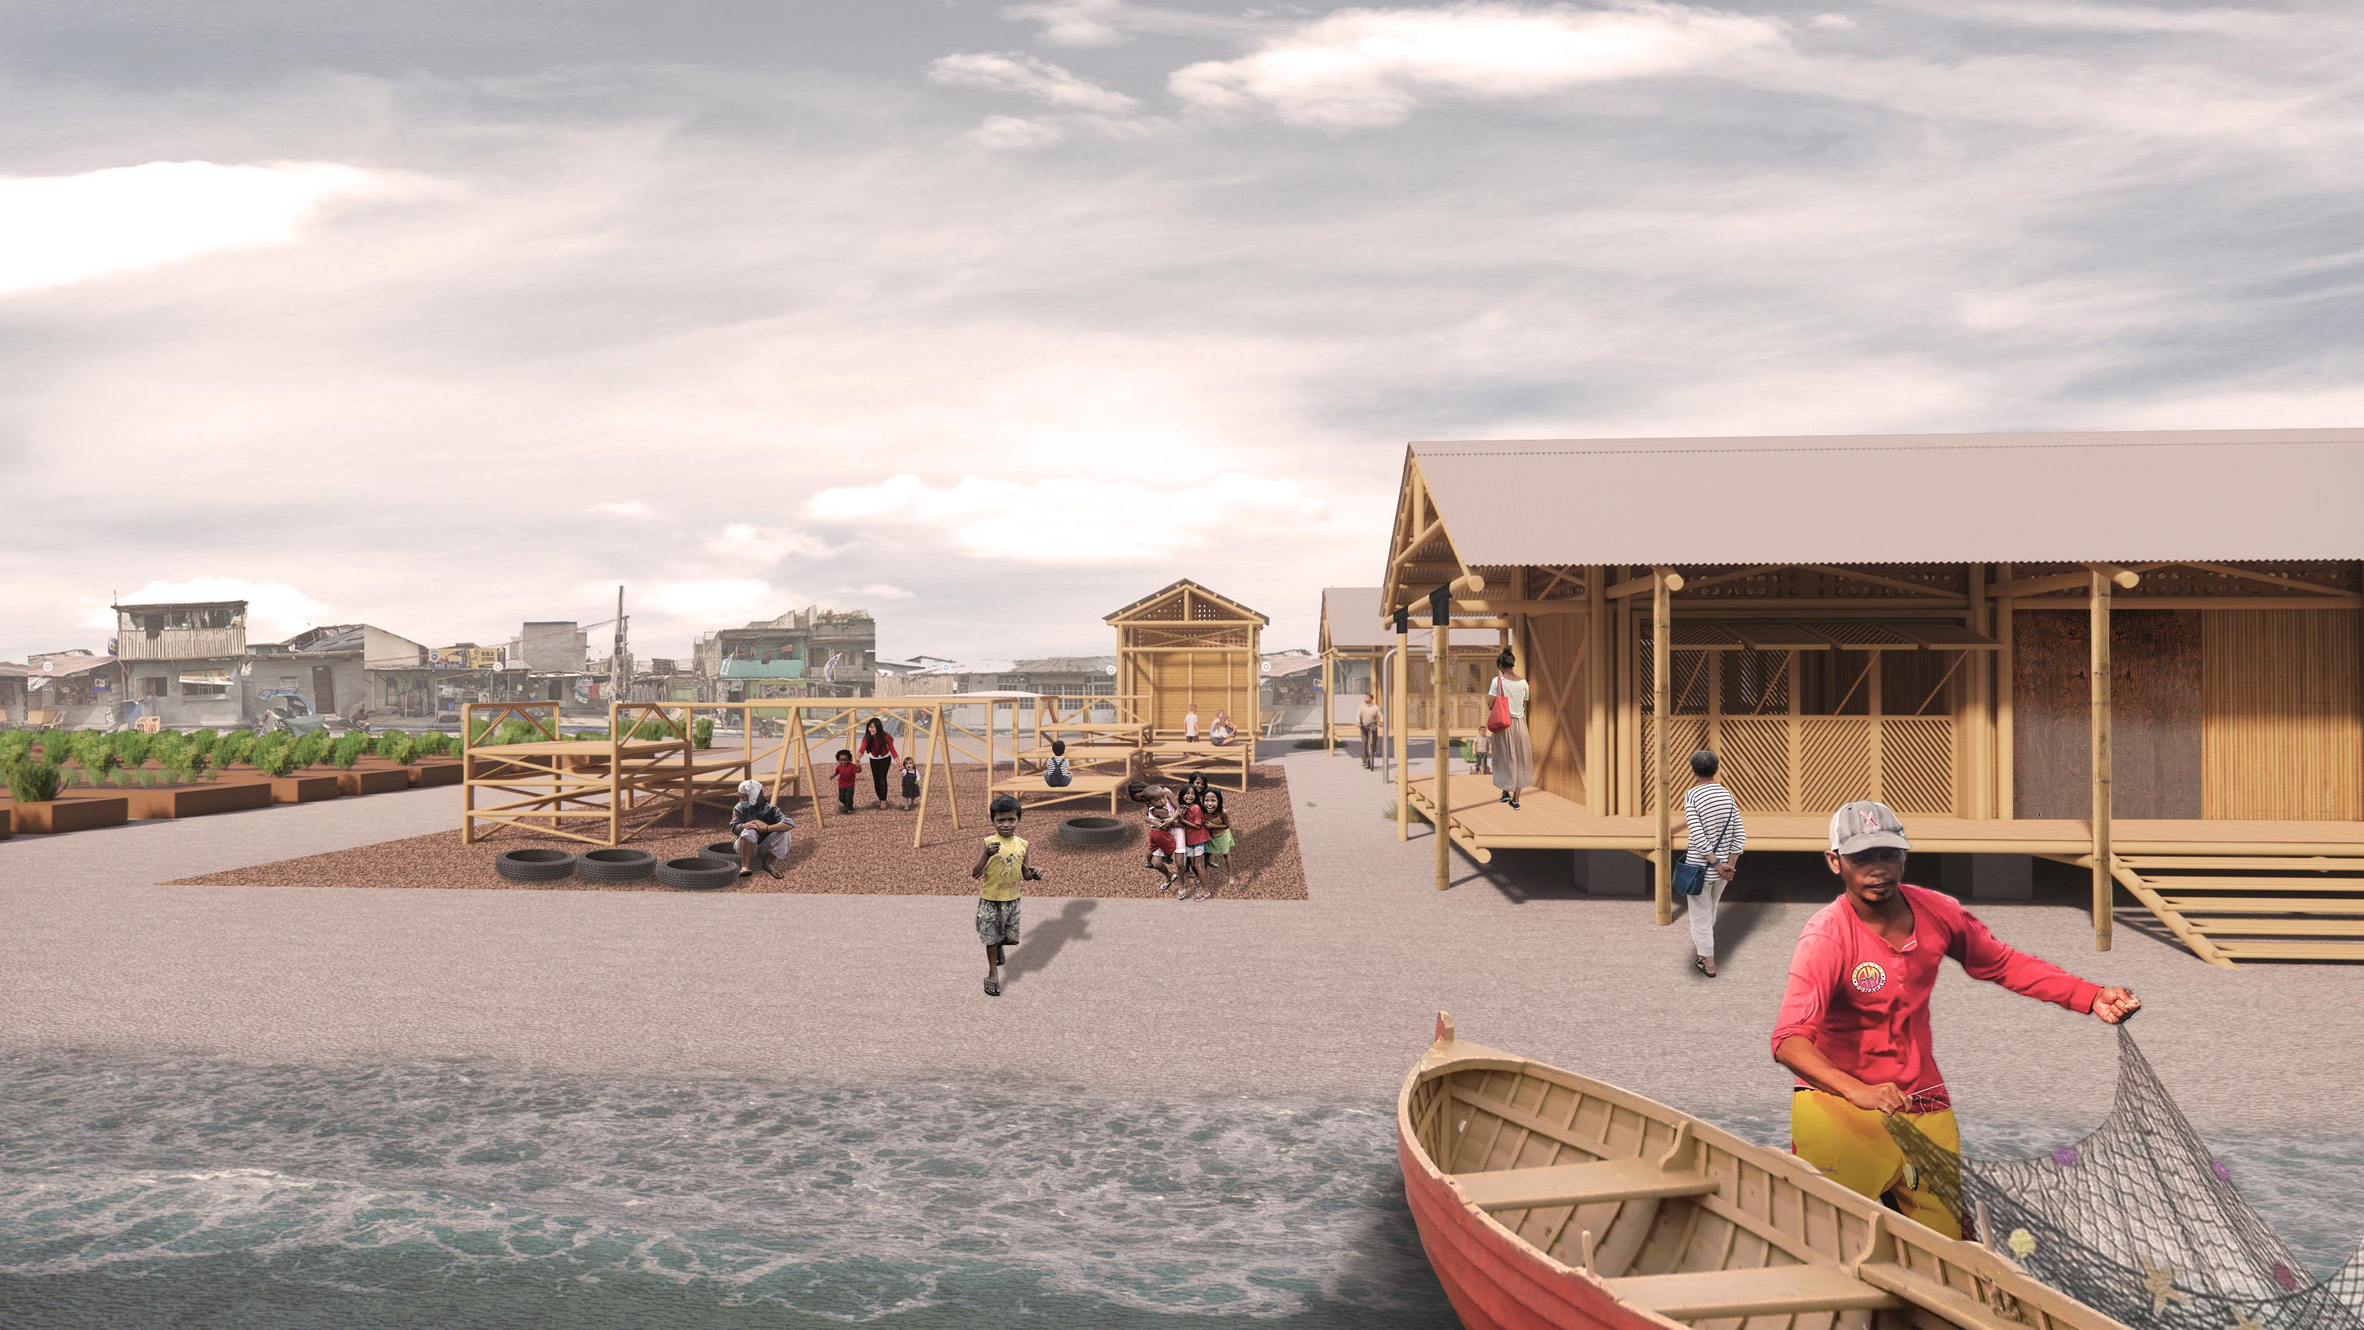 Visualisation showing people in a seaside settlement